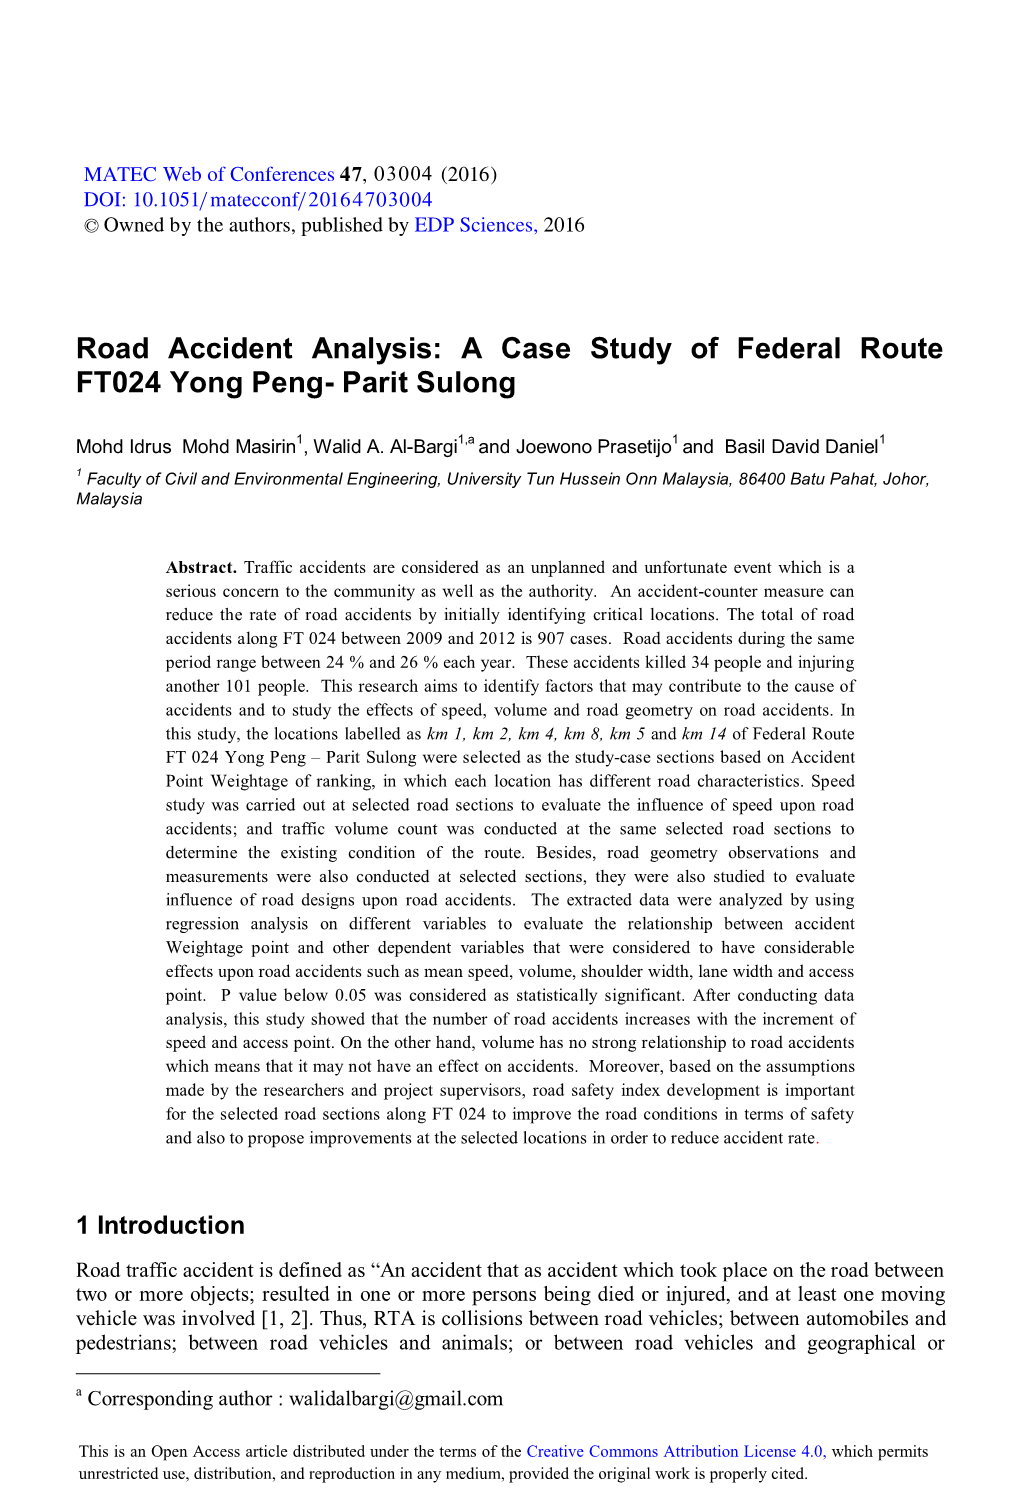 Road Accident Analysis: a Case Study of Federal Route FT024 Yong Peng- Parit Sulong